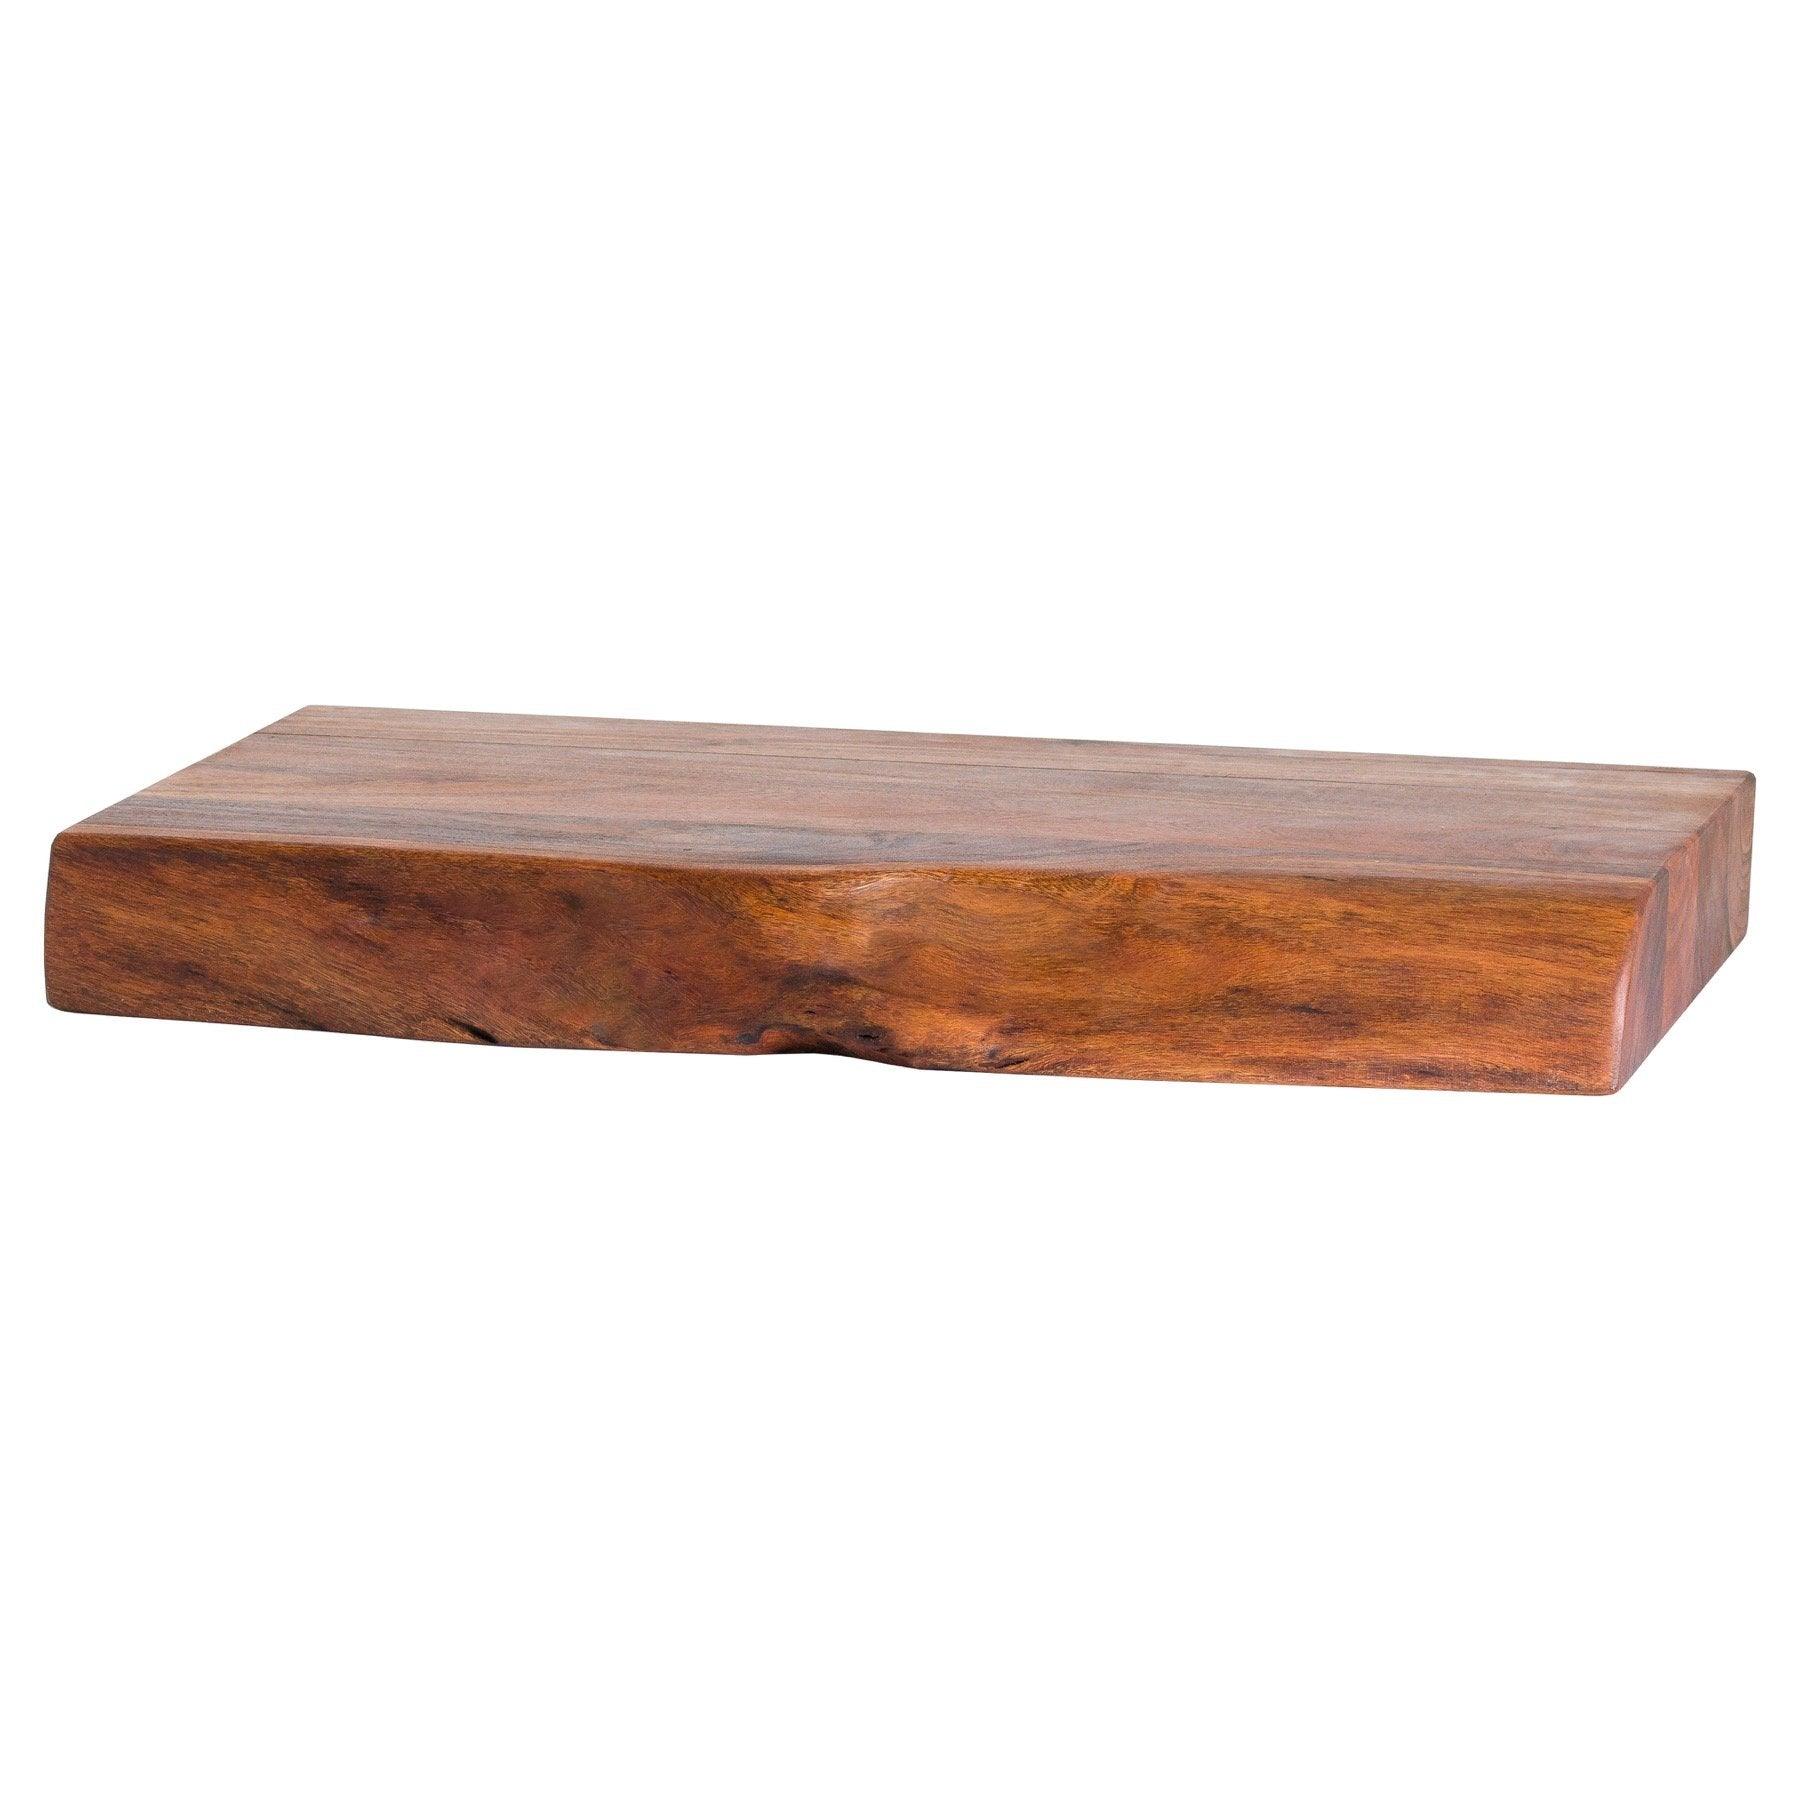 Live Edge Collection Large Pyman Chopping Board - Vookoo Lifestyle